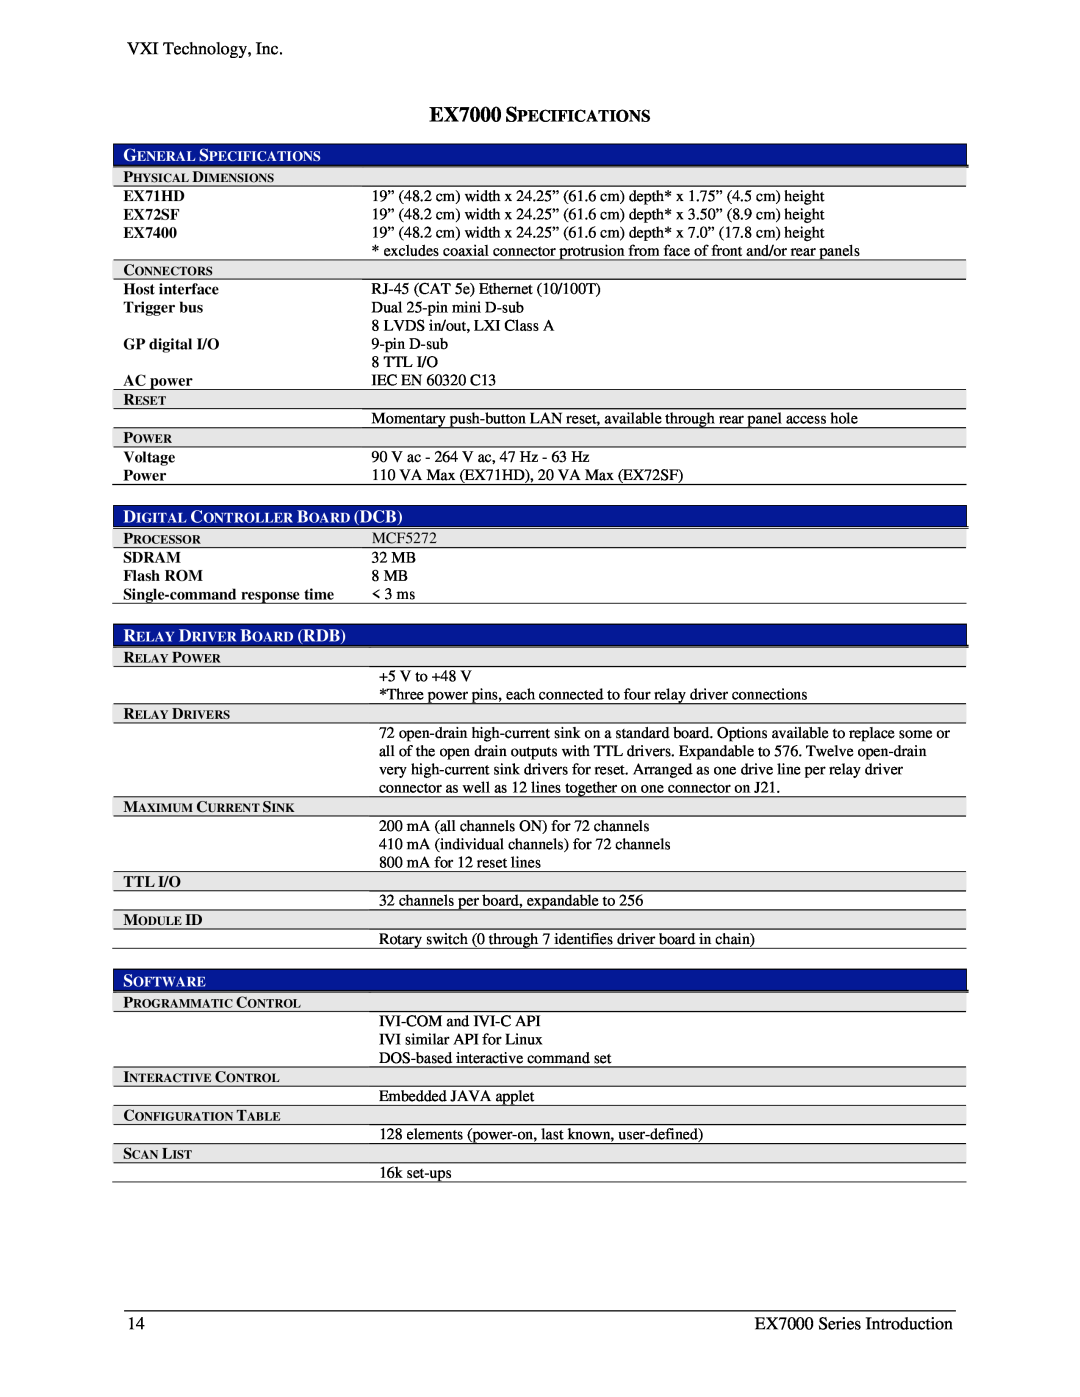 VXI user manual EX7000 SPECIFICATIONS 